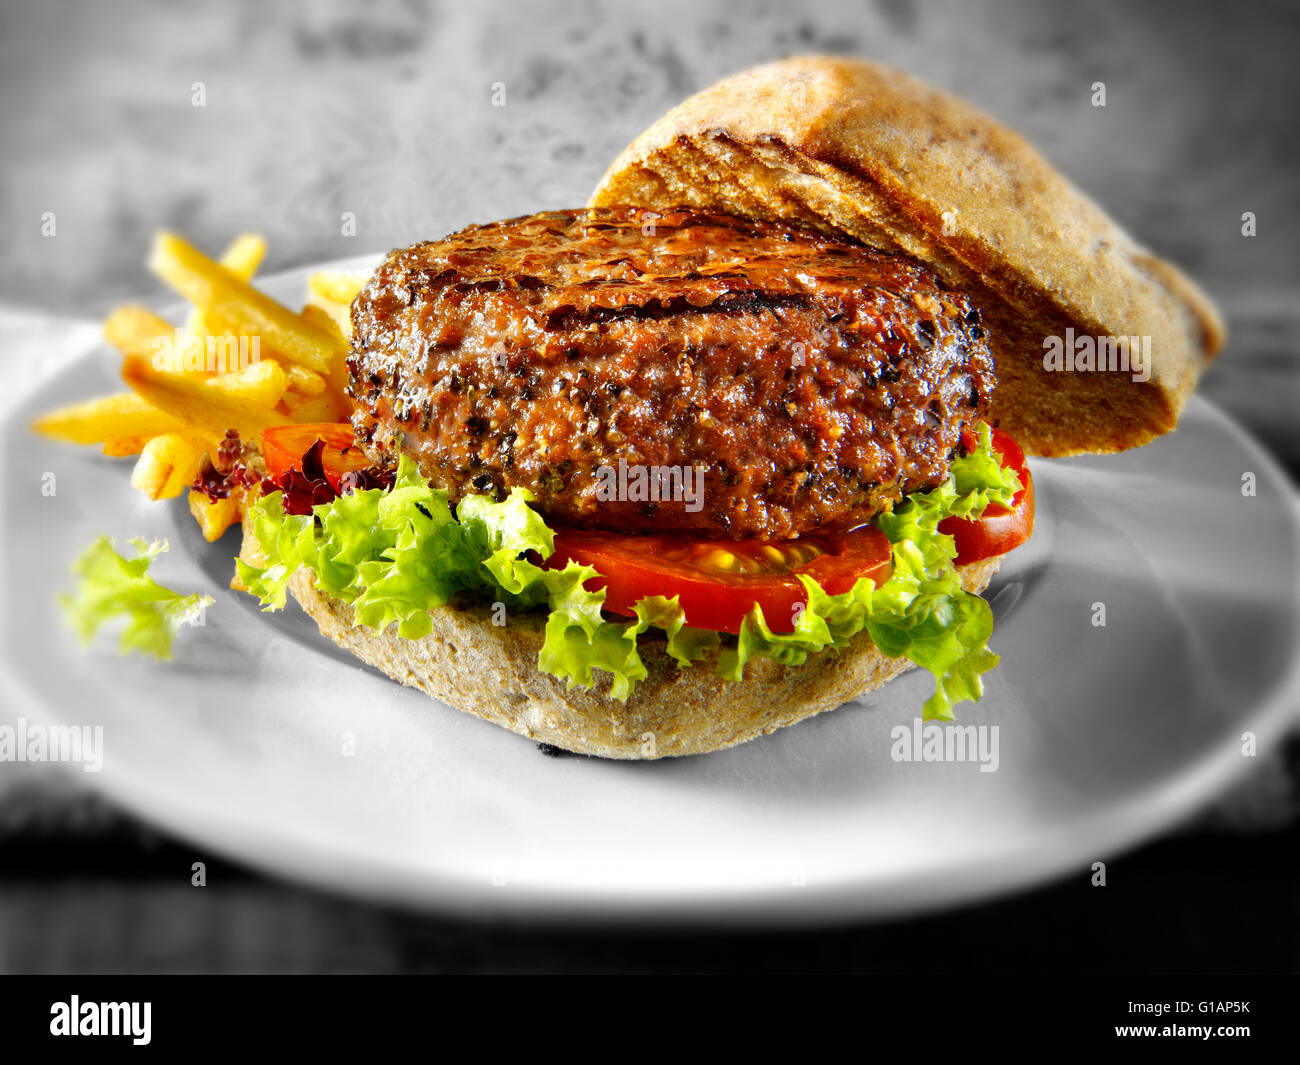 Beef burger or hamburger in a with wholemeal bun with chips Stock Photo